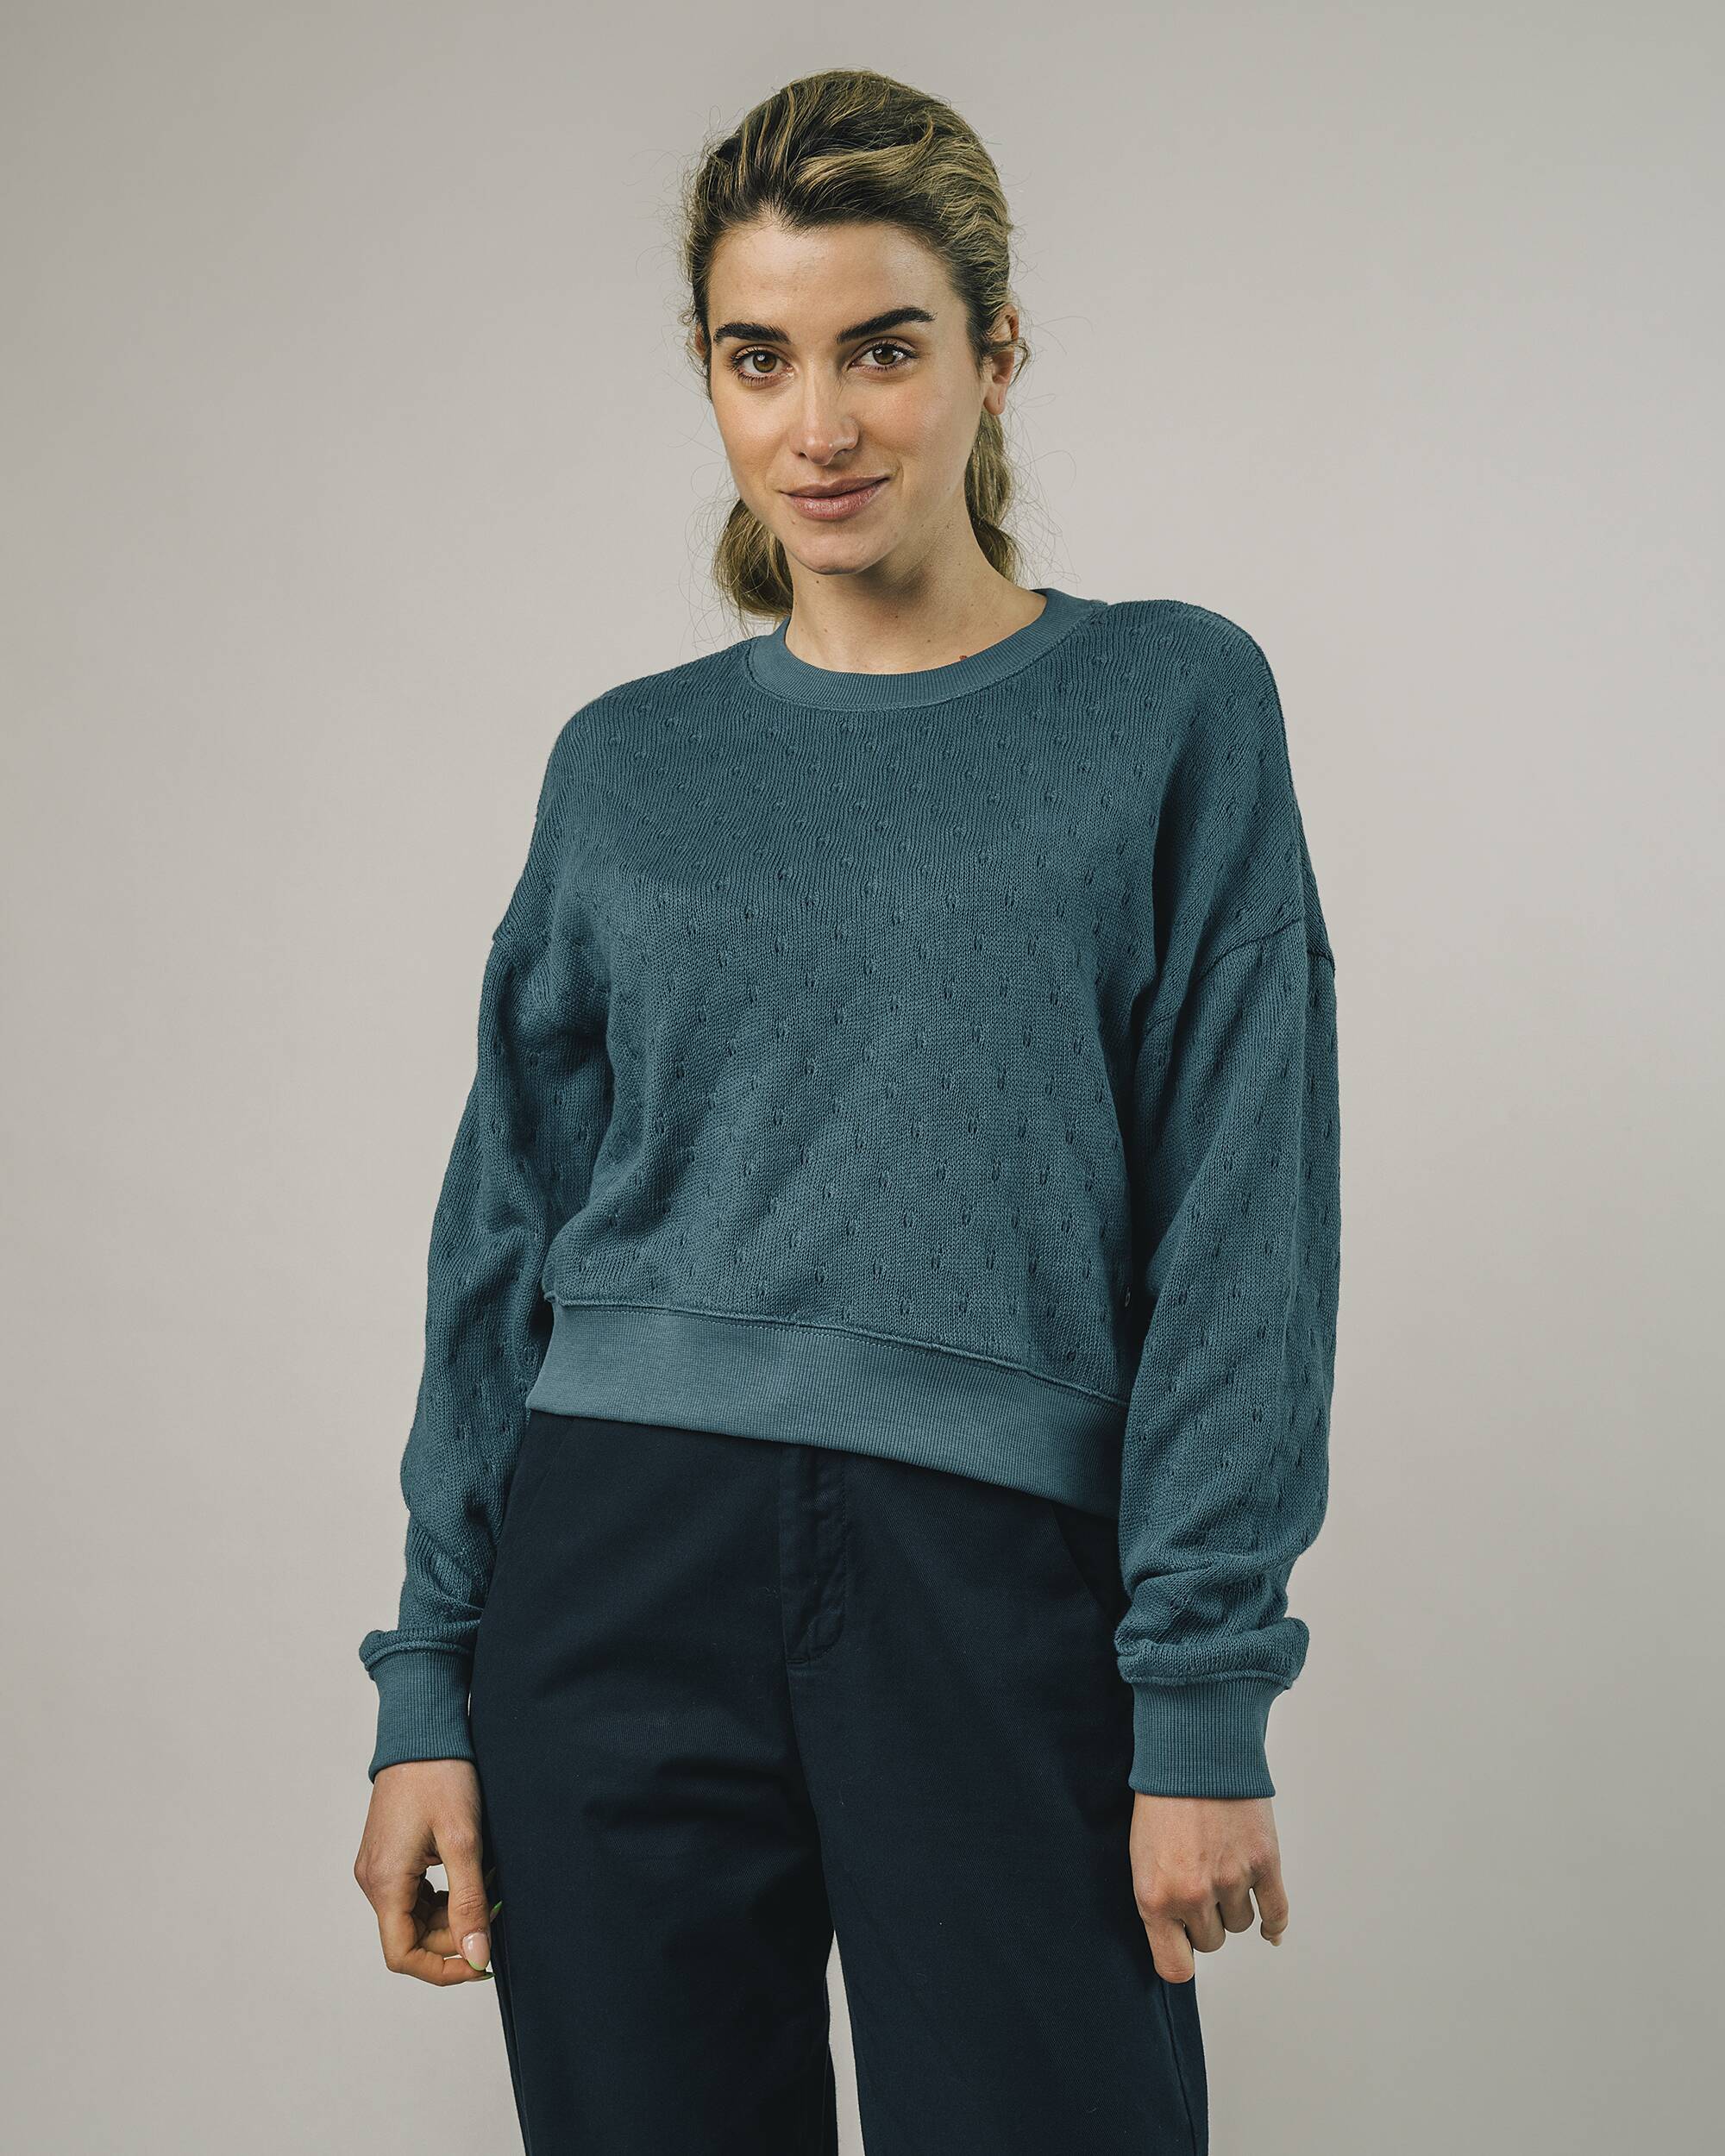 Oversized sweater "Lace" in blue / turquoise made from 100% organic cotton from Brava Fabrics